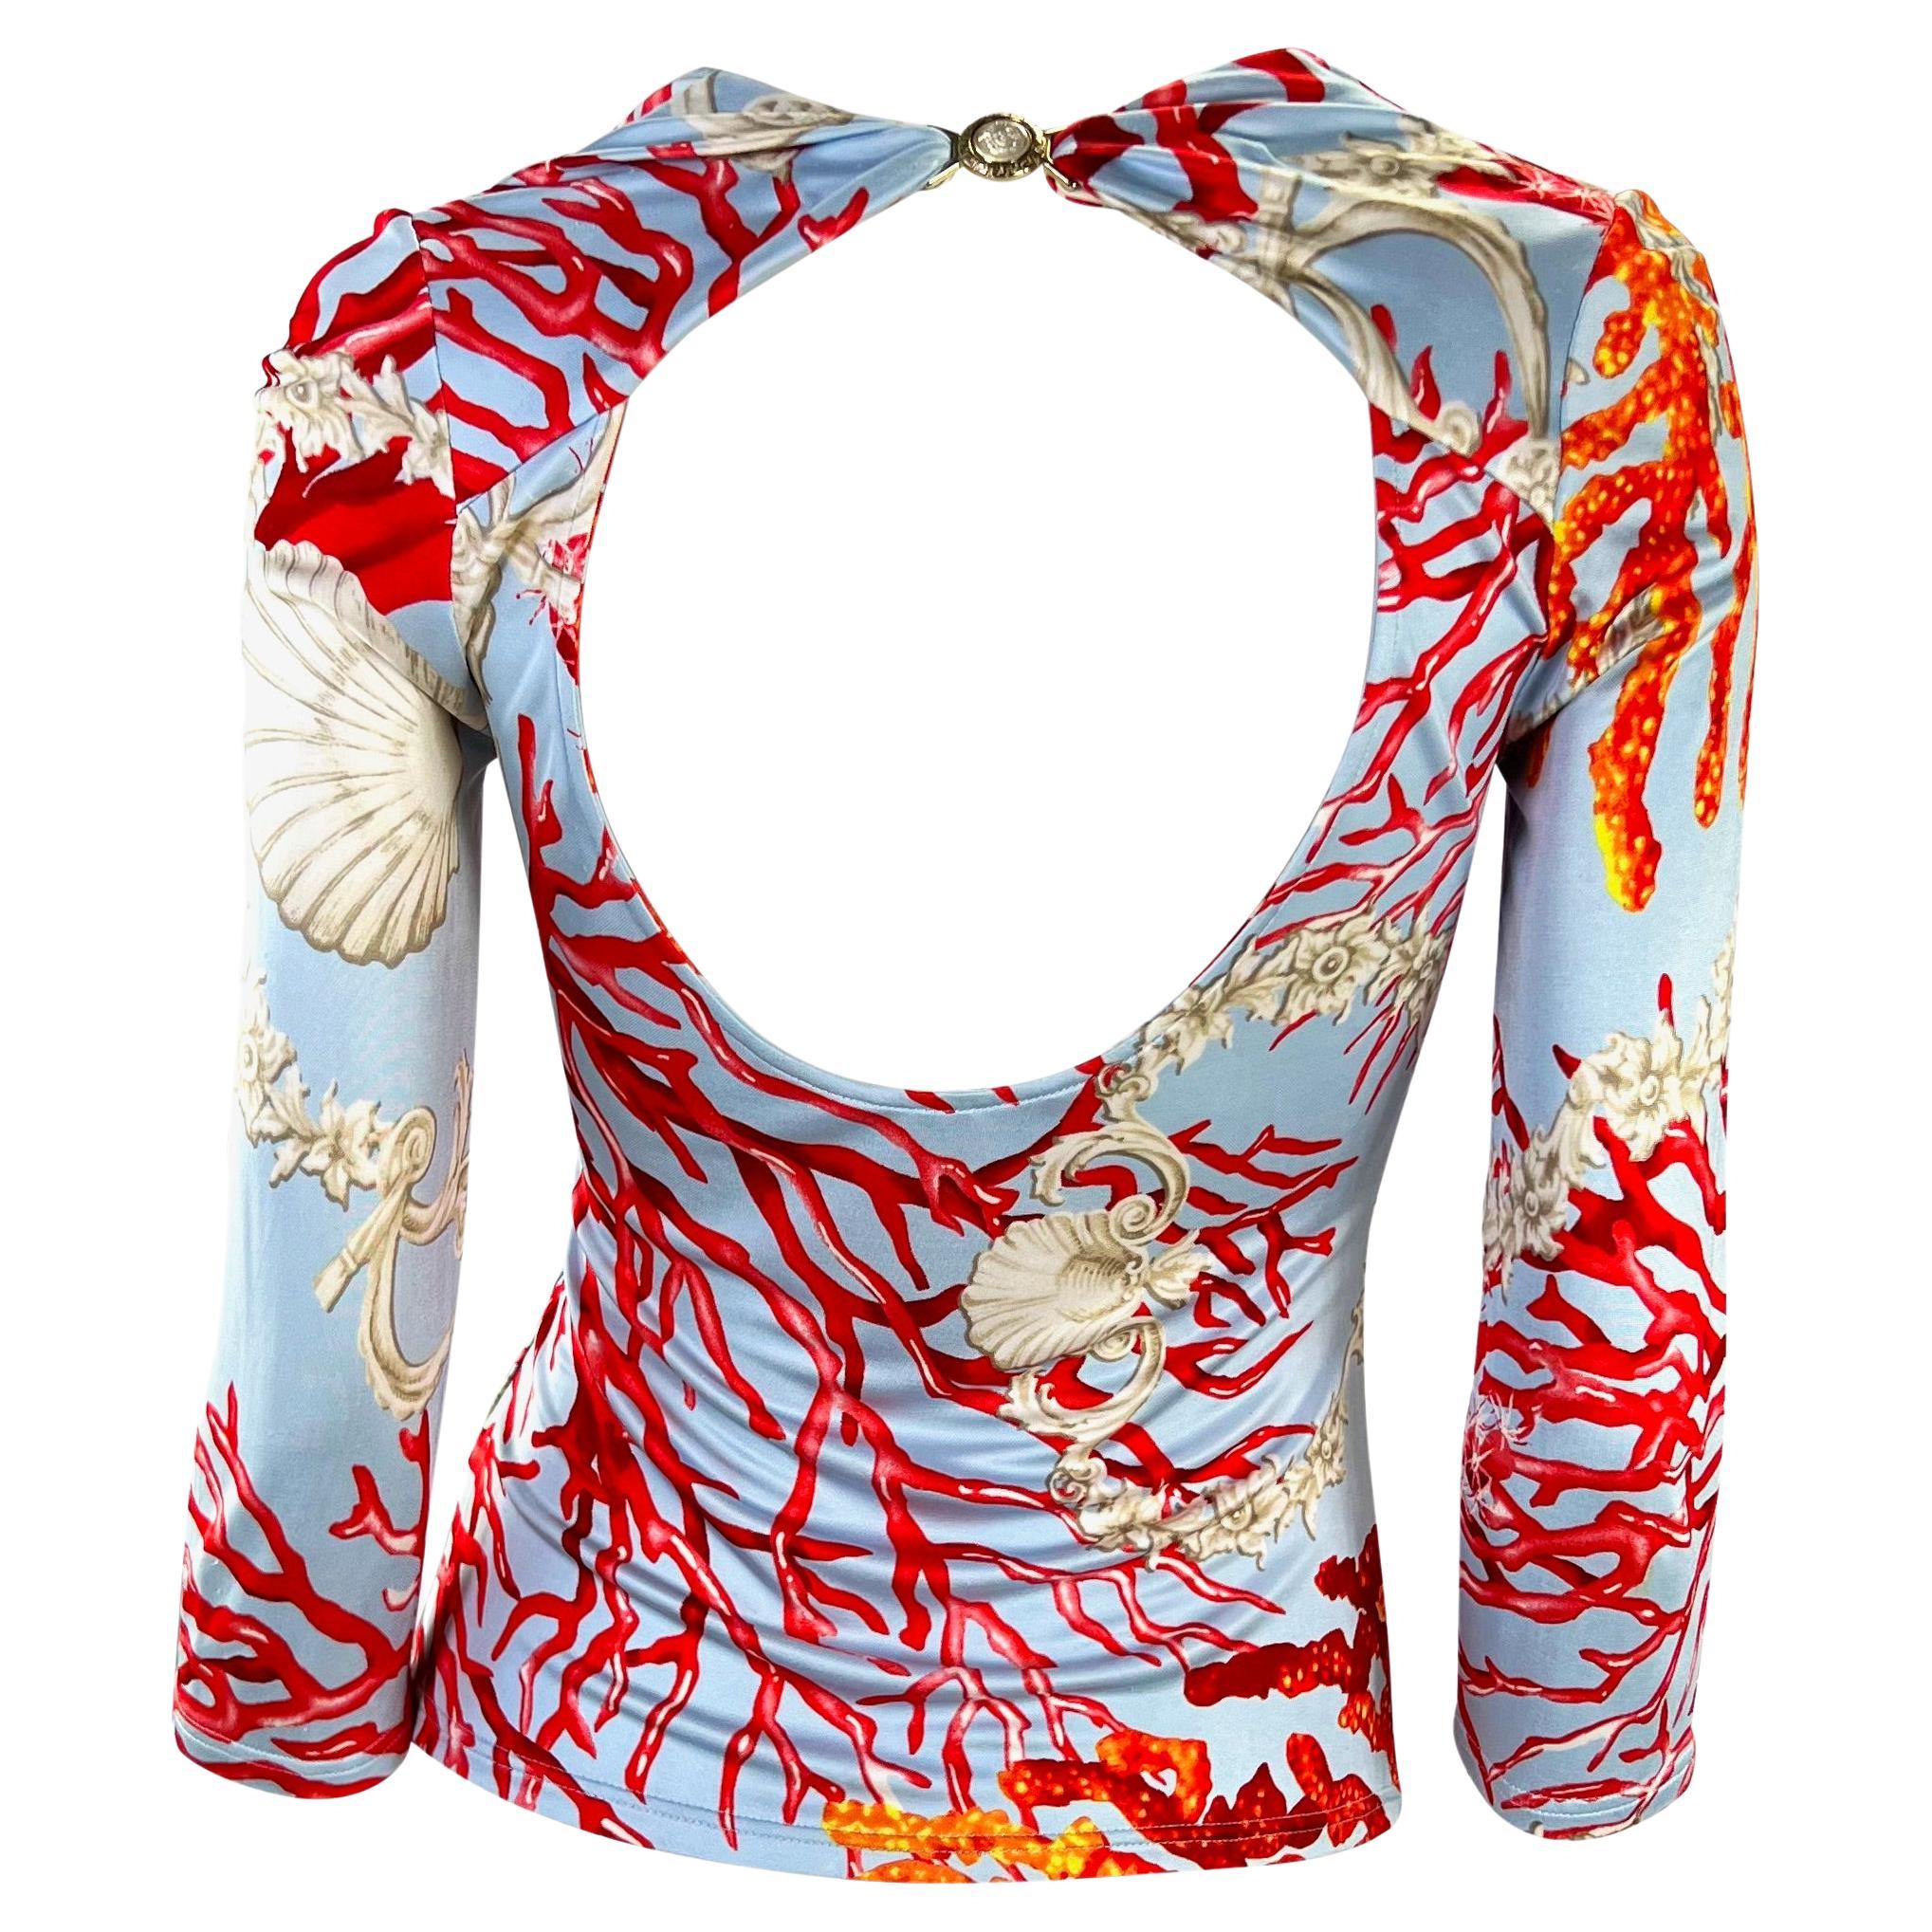 S/S 2005 Versace by Donatella Blue Coral Print Medusa Buckle Viscose Top